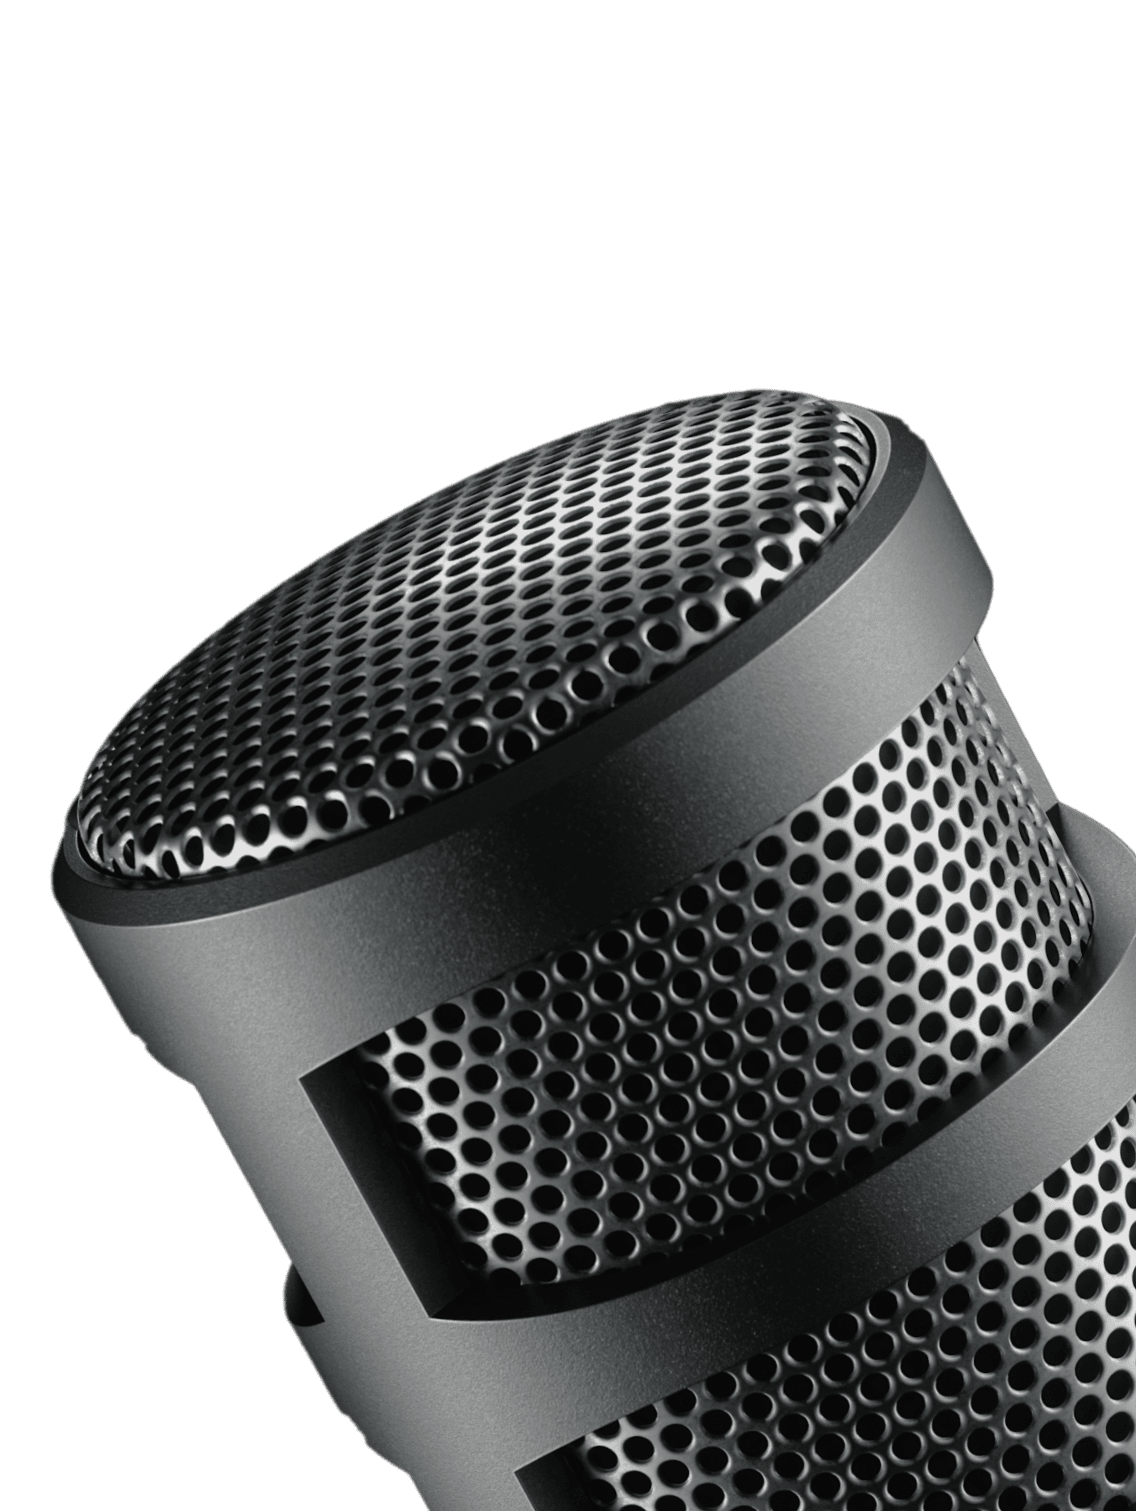 Limelight | Dynamic Vocal XLR Microphone Designed for Podcasting,  Streaming, and Broadcasting - 512 Audio